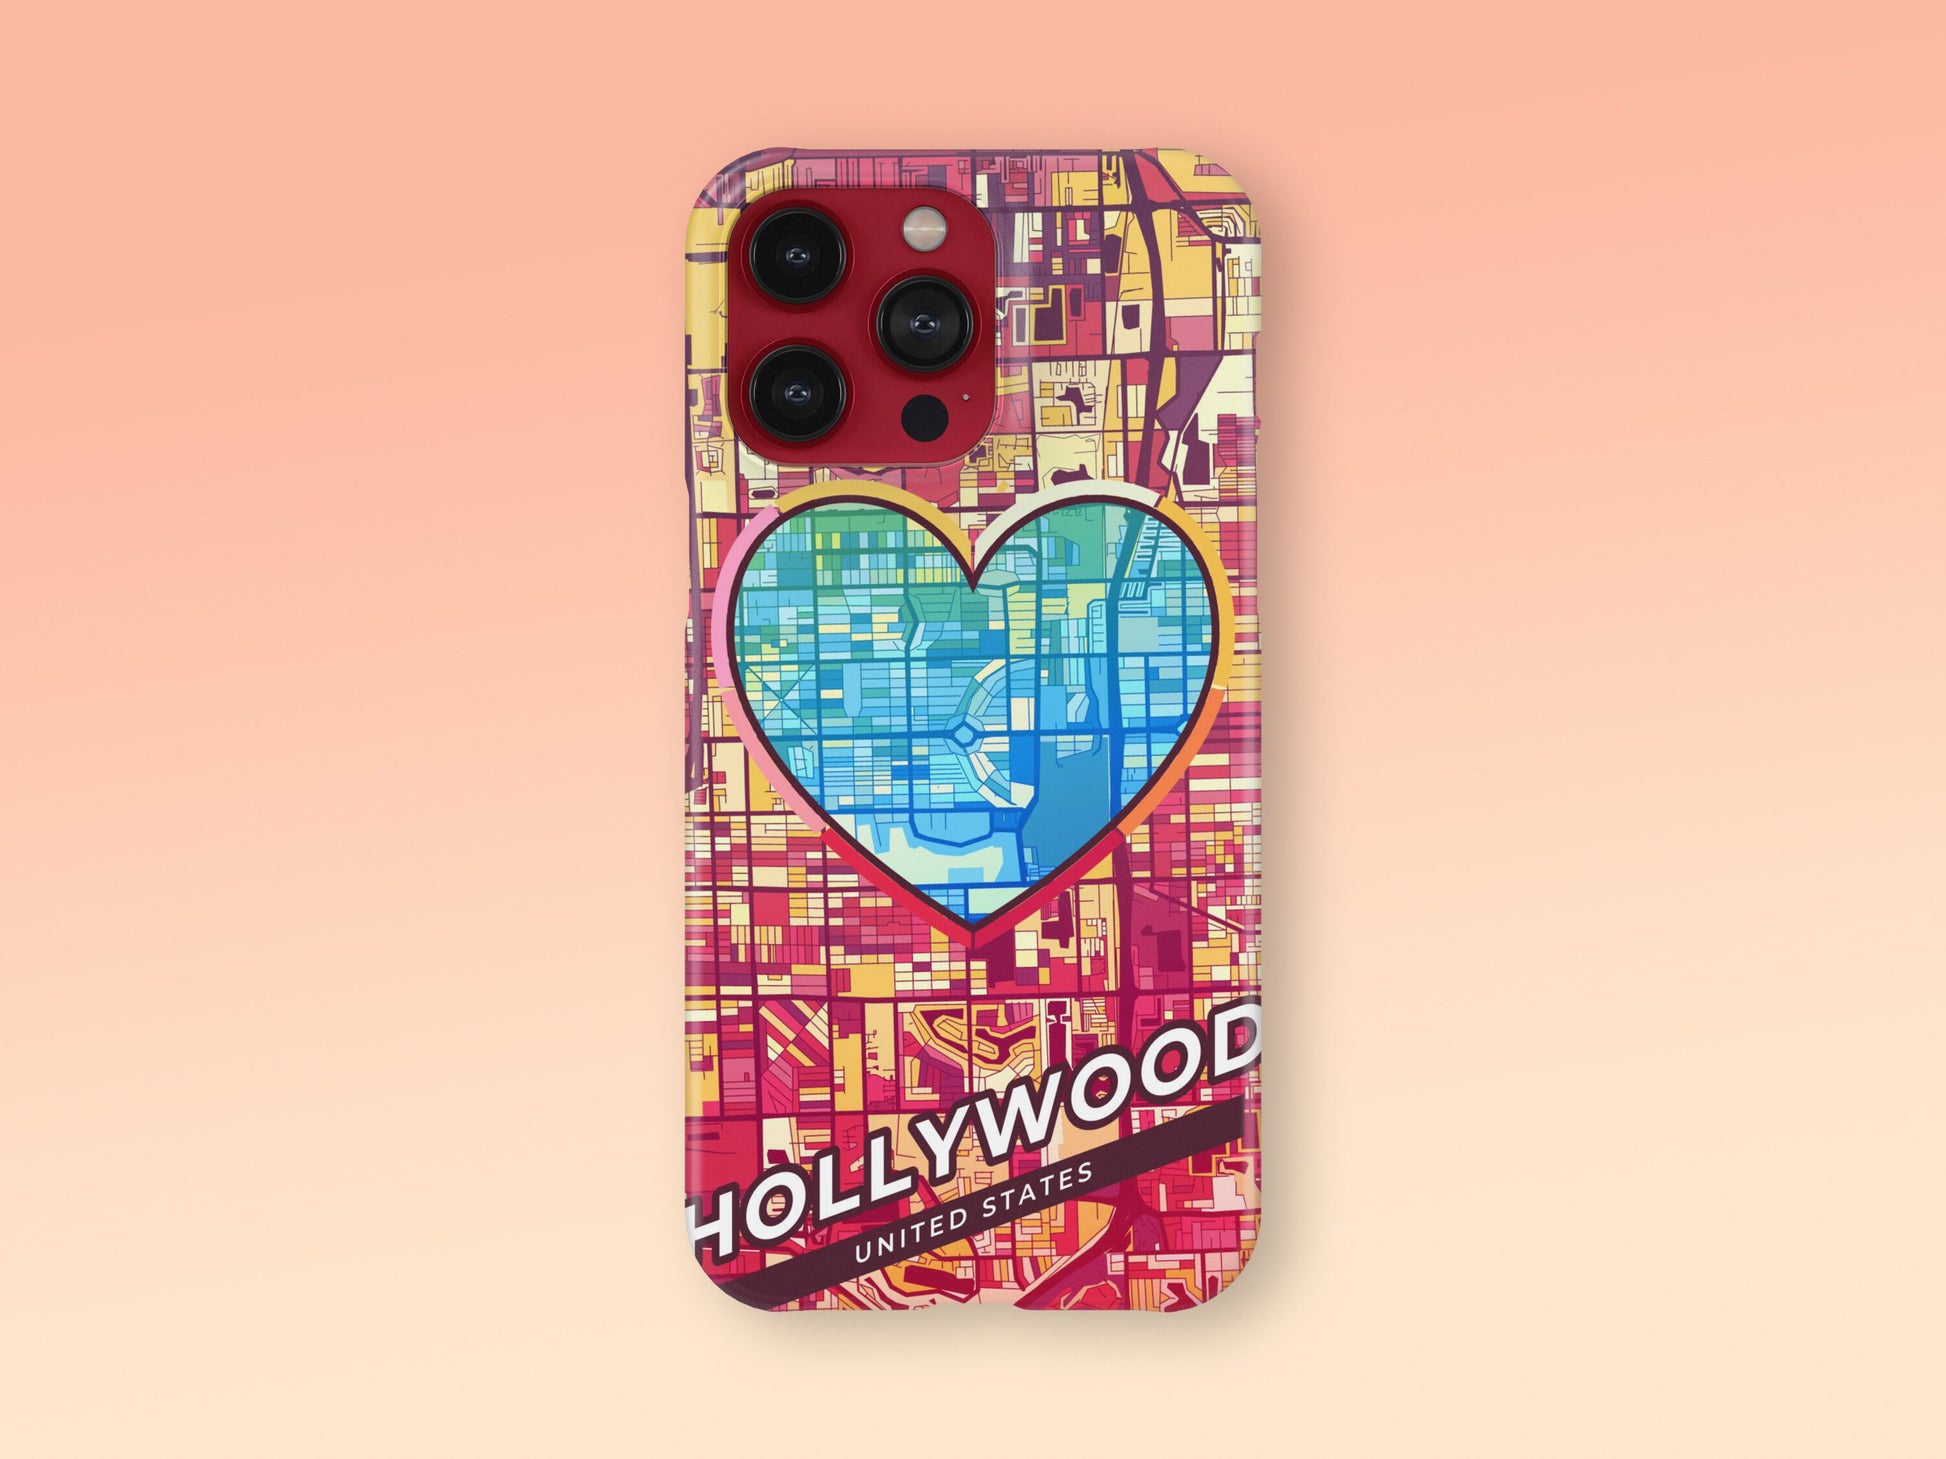 Hollywood Florida slim phone case with colorful icon. Birthday, wedding or housewarming gift. Couple match cases. 2